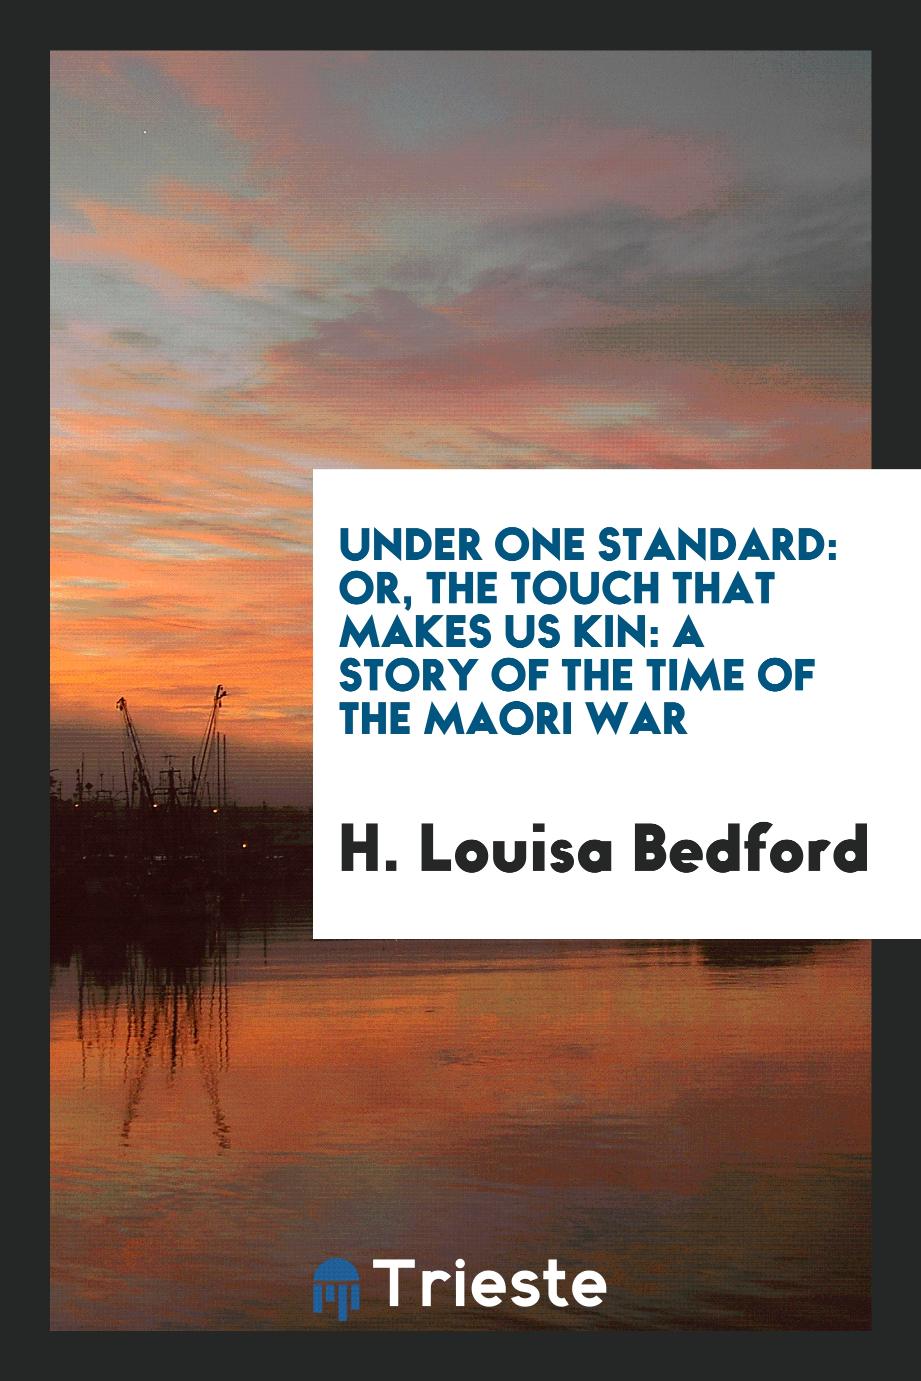 H. Louisa Bedford - Under one standard: or, The touch that makes us kin: a story of the time of the Maori War